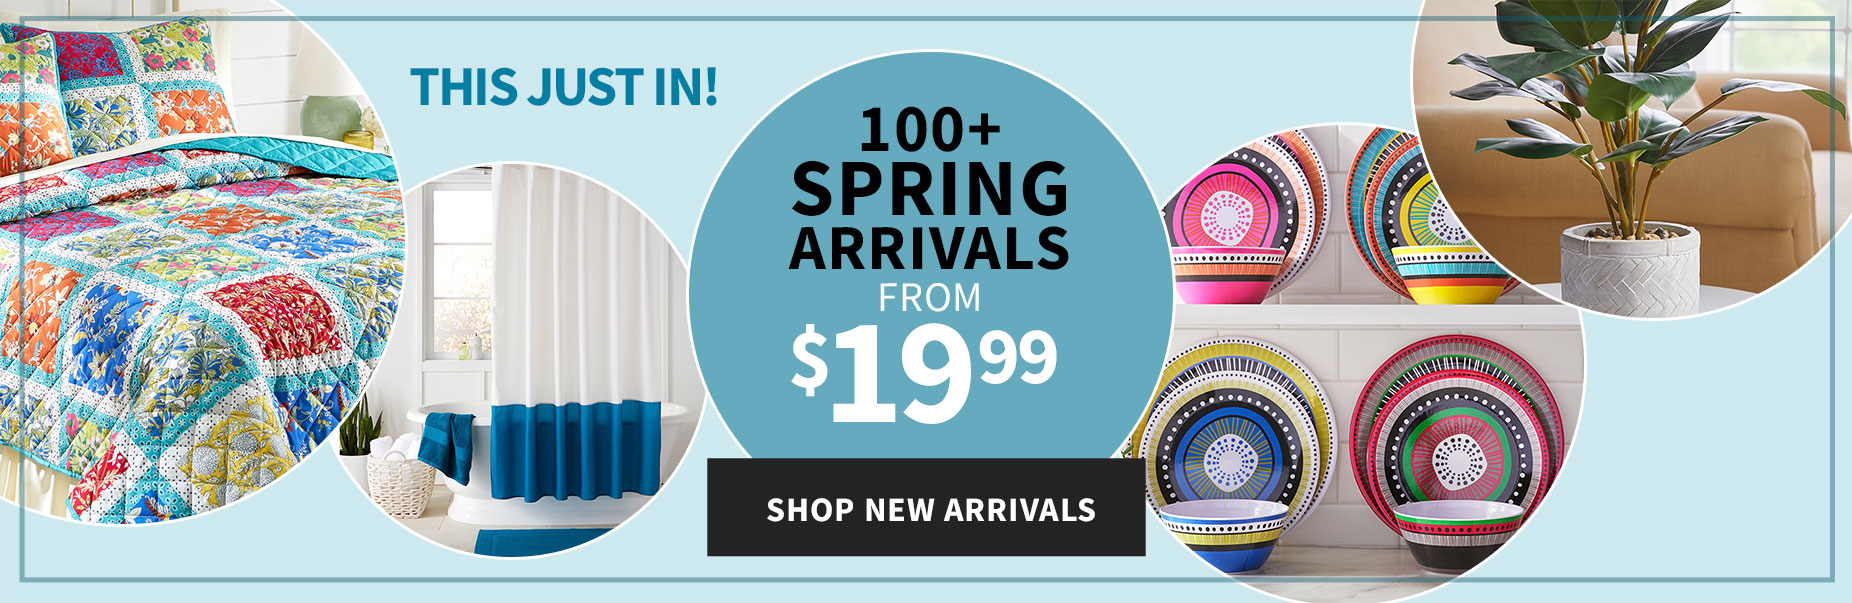 Spring arrivals from $19.99.